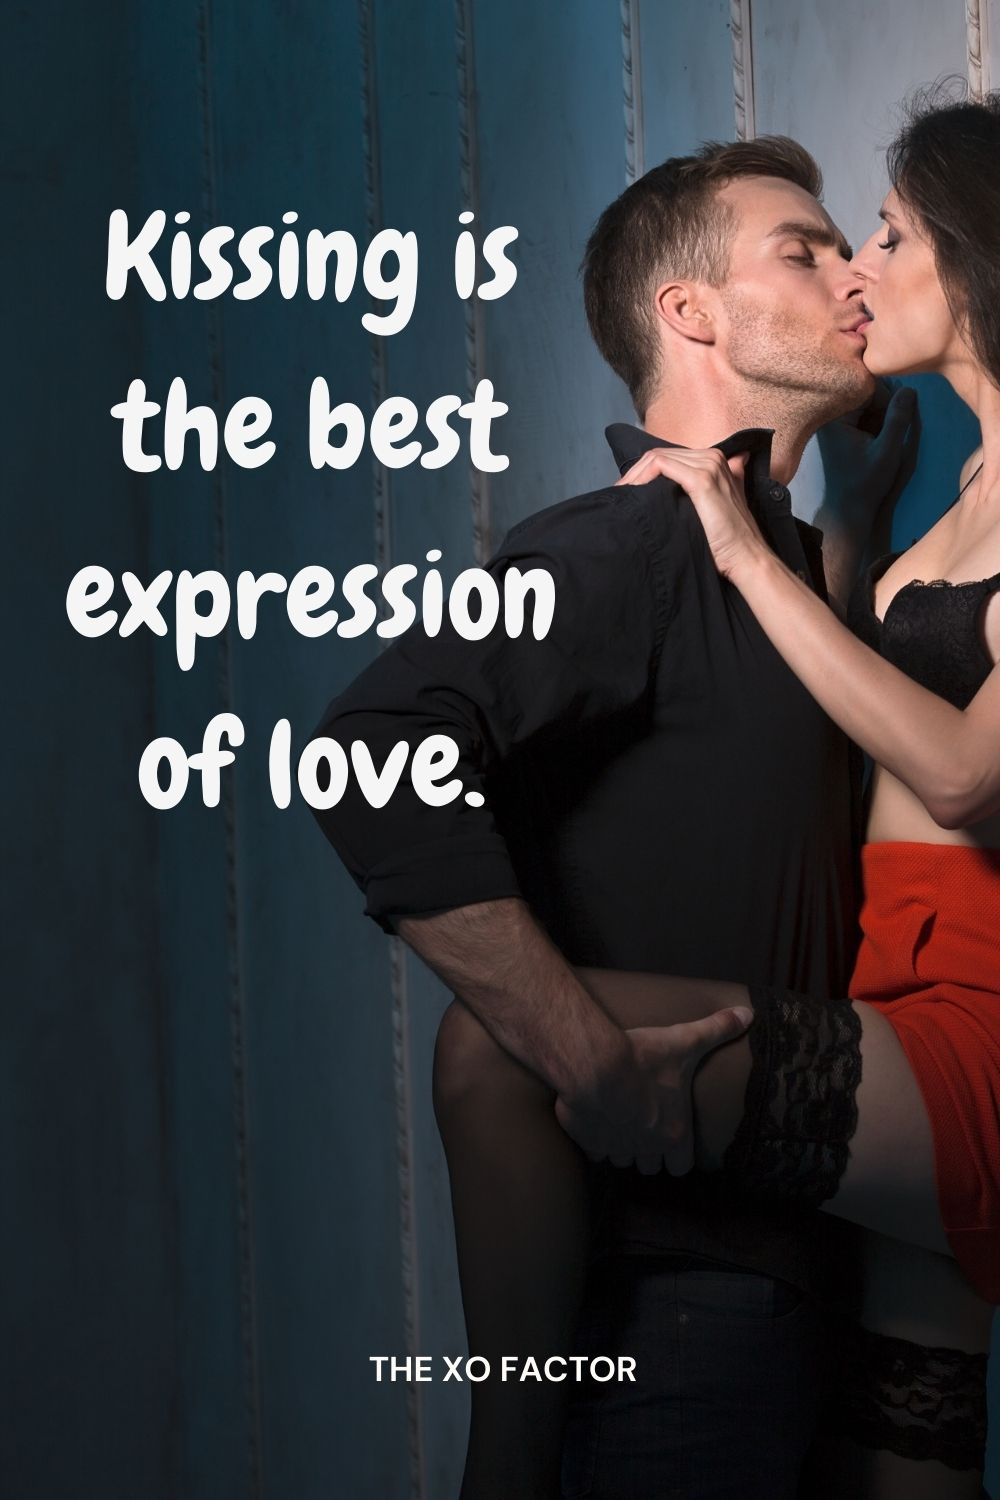 Kissing is the best expression of love.